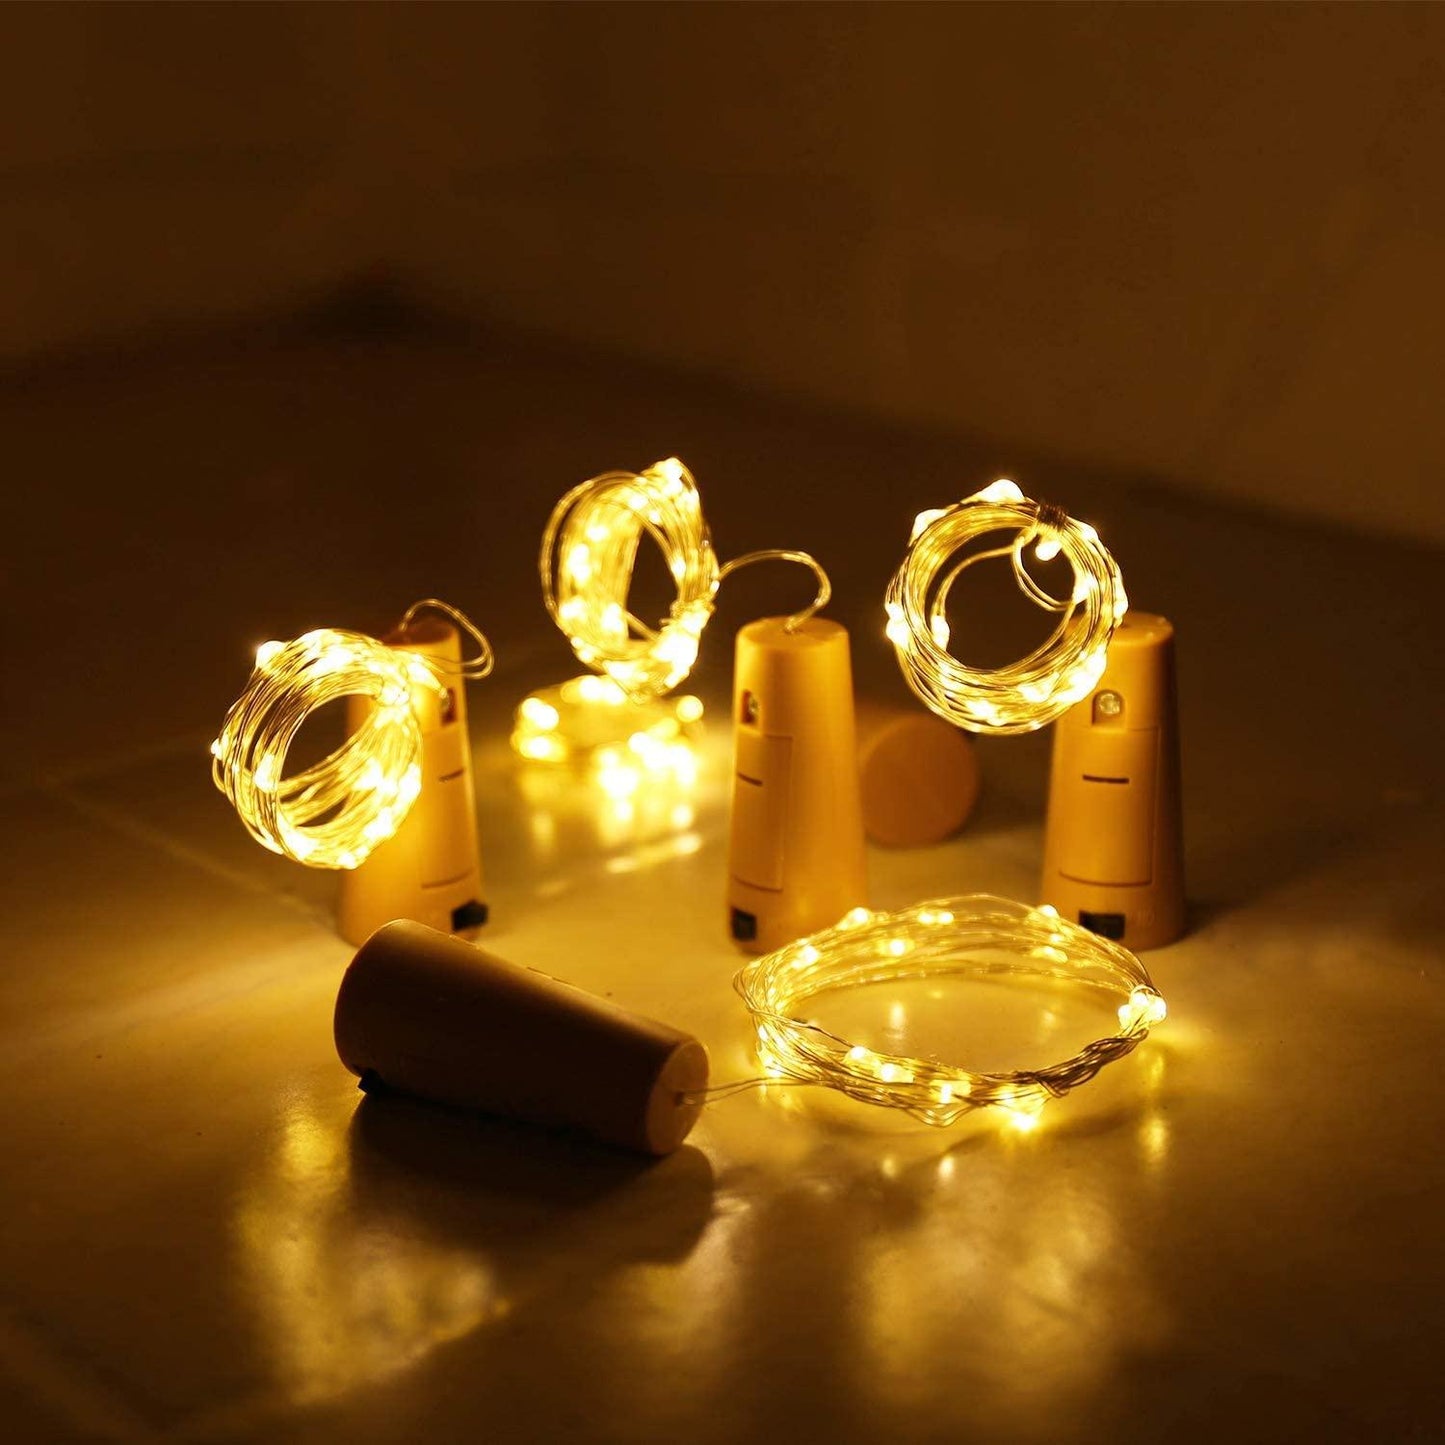 Wine Bottle Lights with Cork for Home - If you say i do